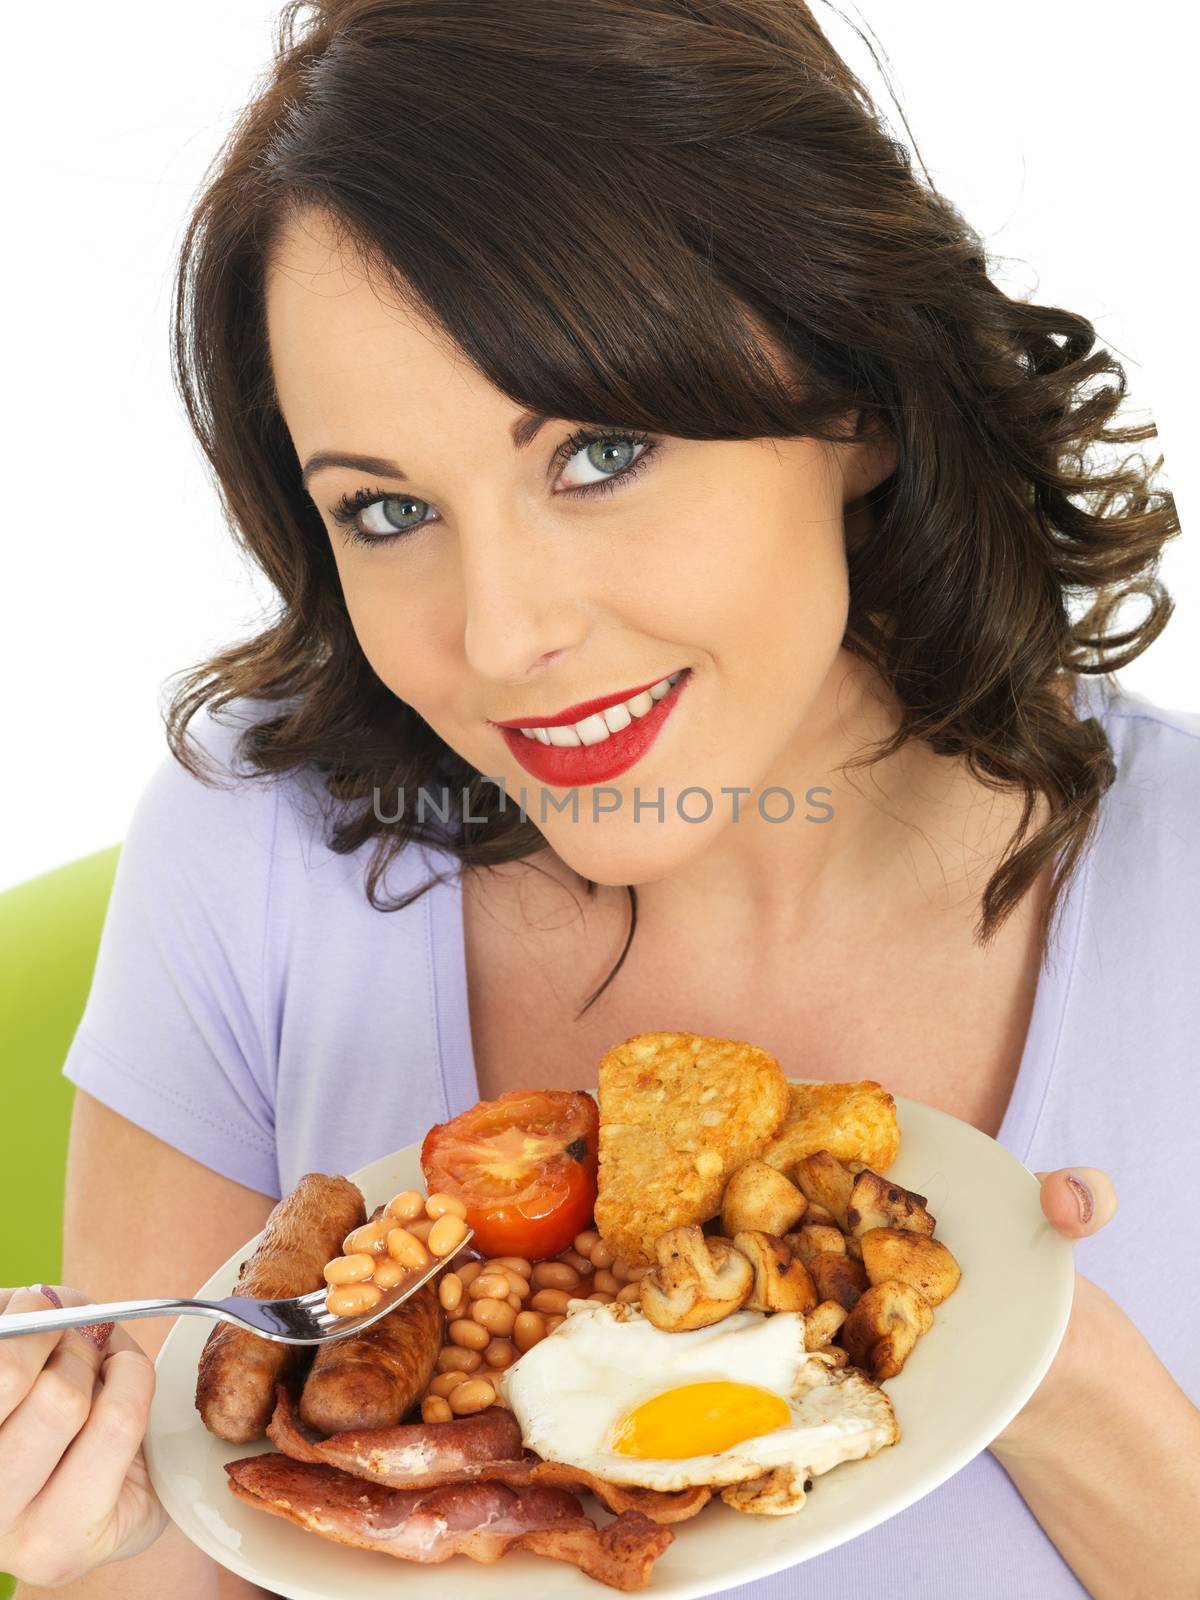 Young Woman Eating a Full English Breakfast by Whiteboxmedia